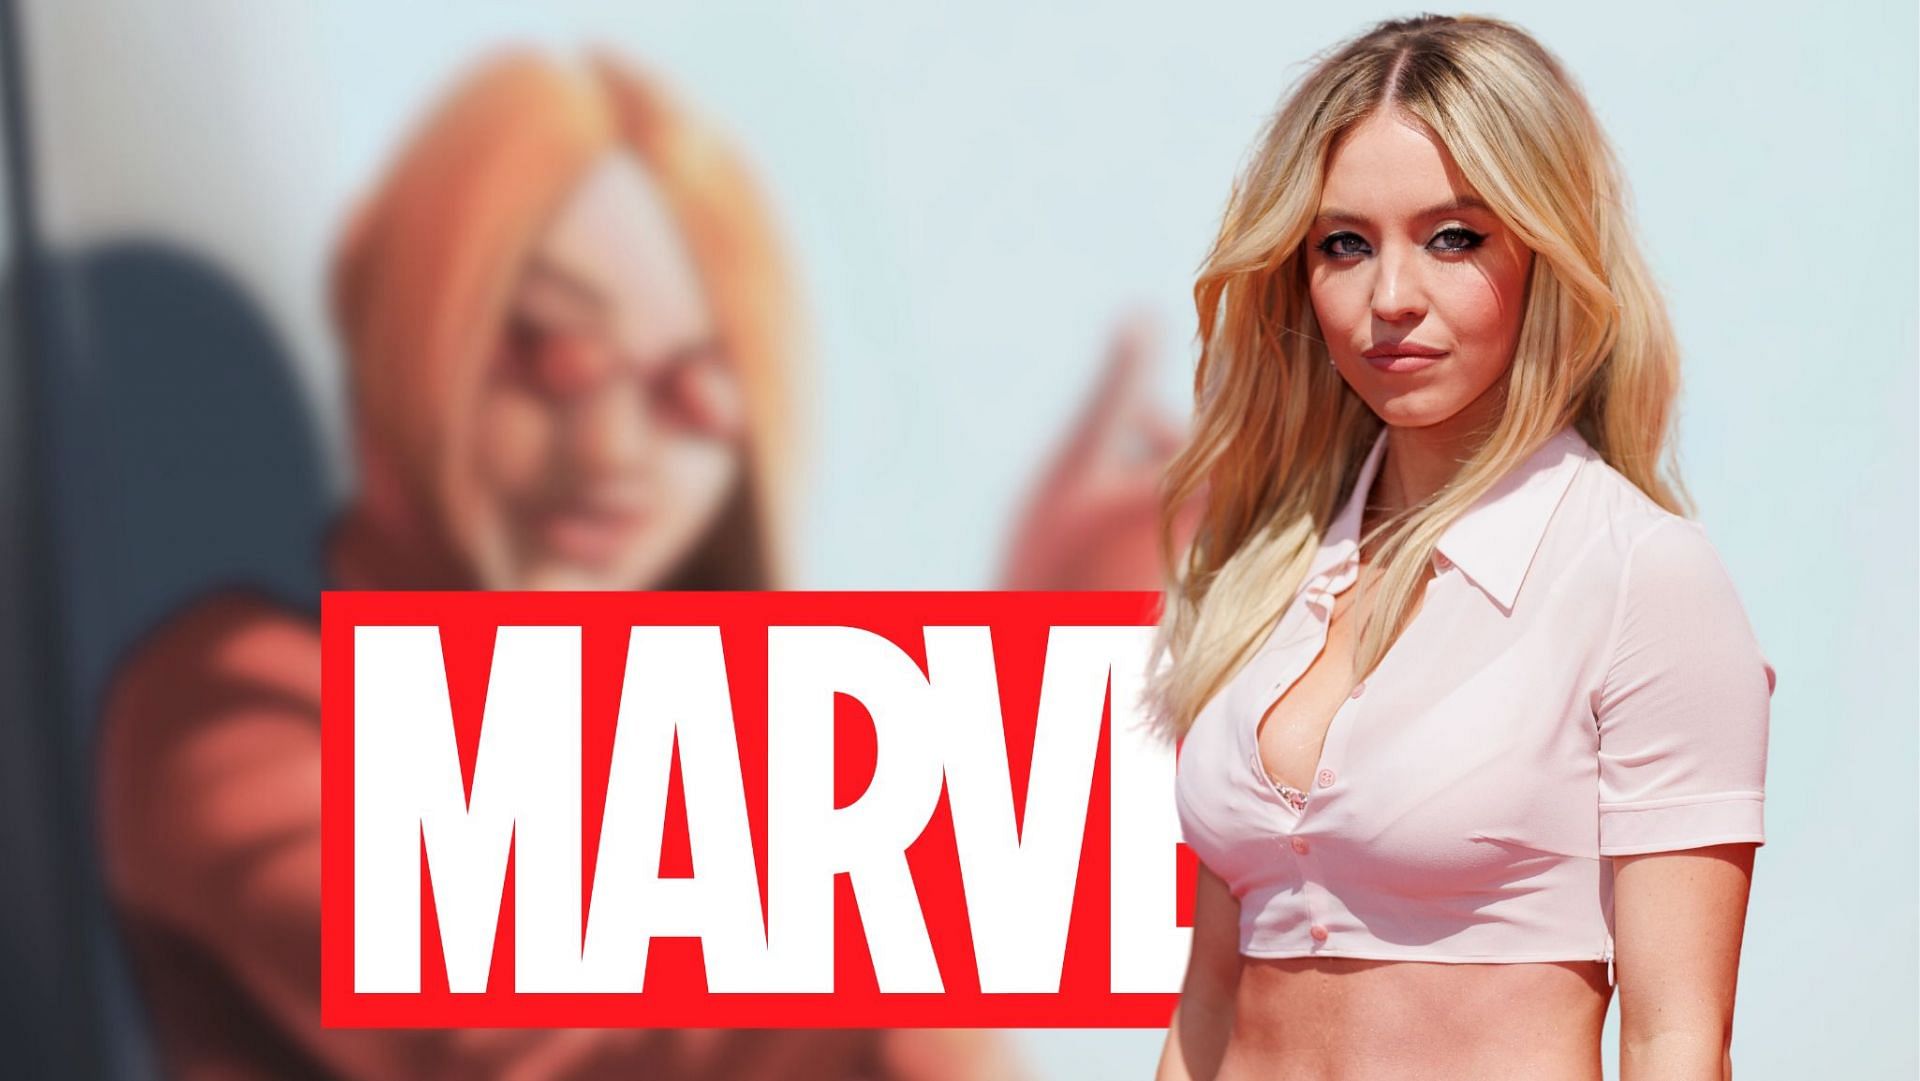 Sydney Sweeney ignites anticipation among fans as she prepares for her thrilling Marvel debut, bringing her undeniable talent to the superhero realm (Image via Sportskeeda)